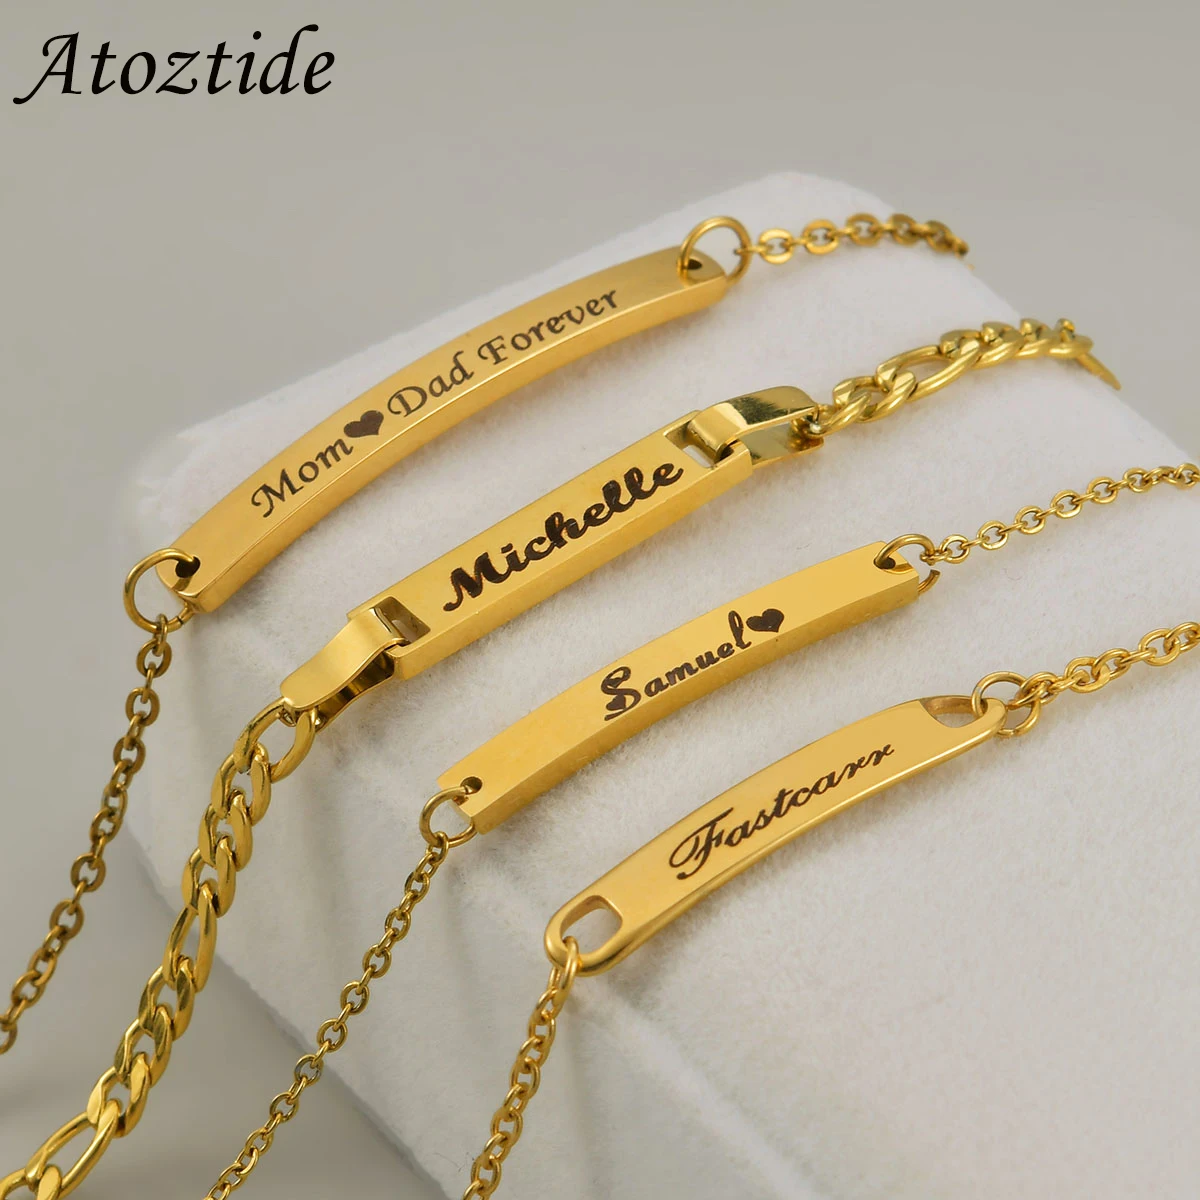 Atoztide Custom Baby Name Bar Nameplate Bracelet For Stainless Steel Women Kids Adjustable Link Chain Personalized Jewelry Gift